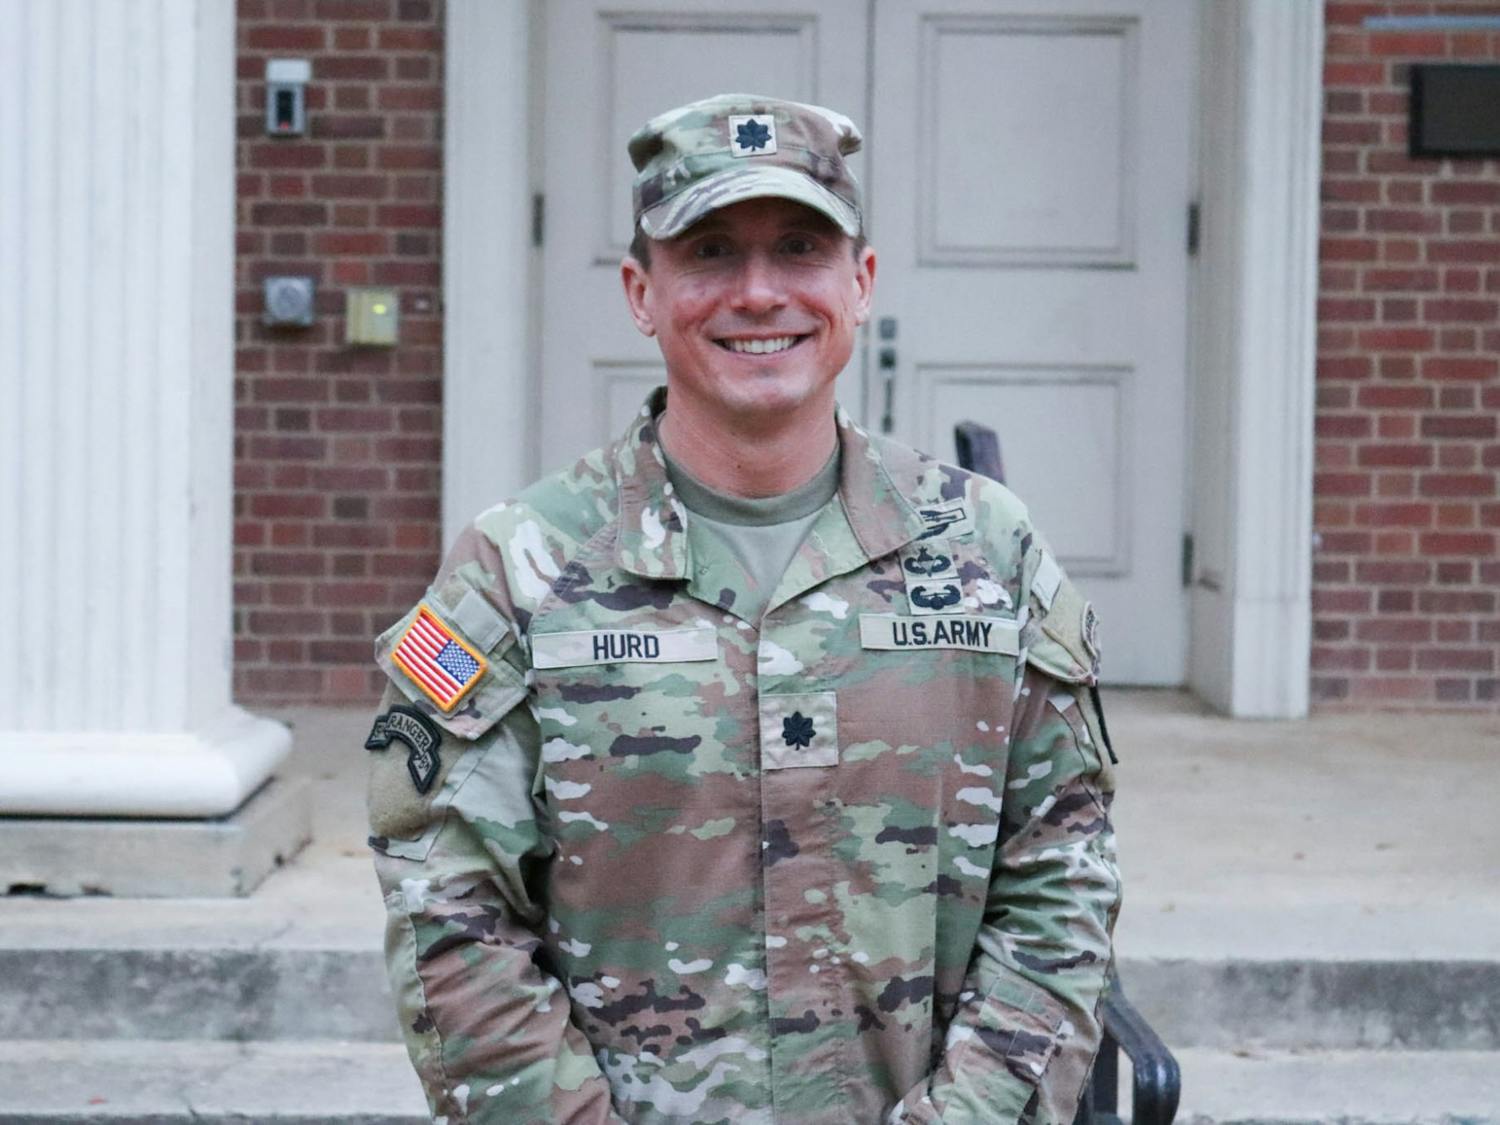 Lieutenant Colonel Daniel Hurd, Department Chair of UNC Army ROTC, poses in front of the ROTC Armory on Nov. 10, 2022.